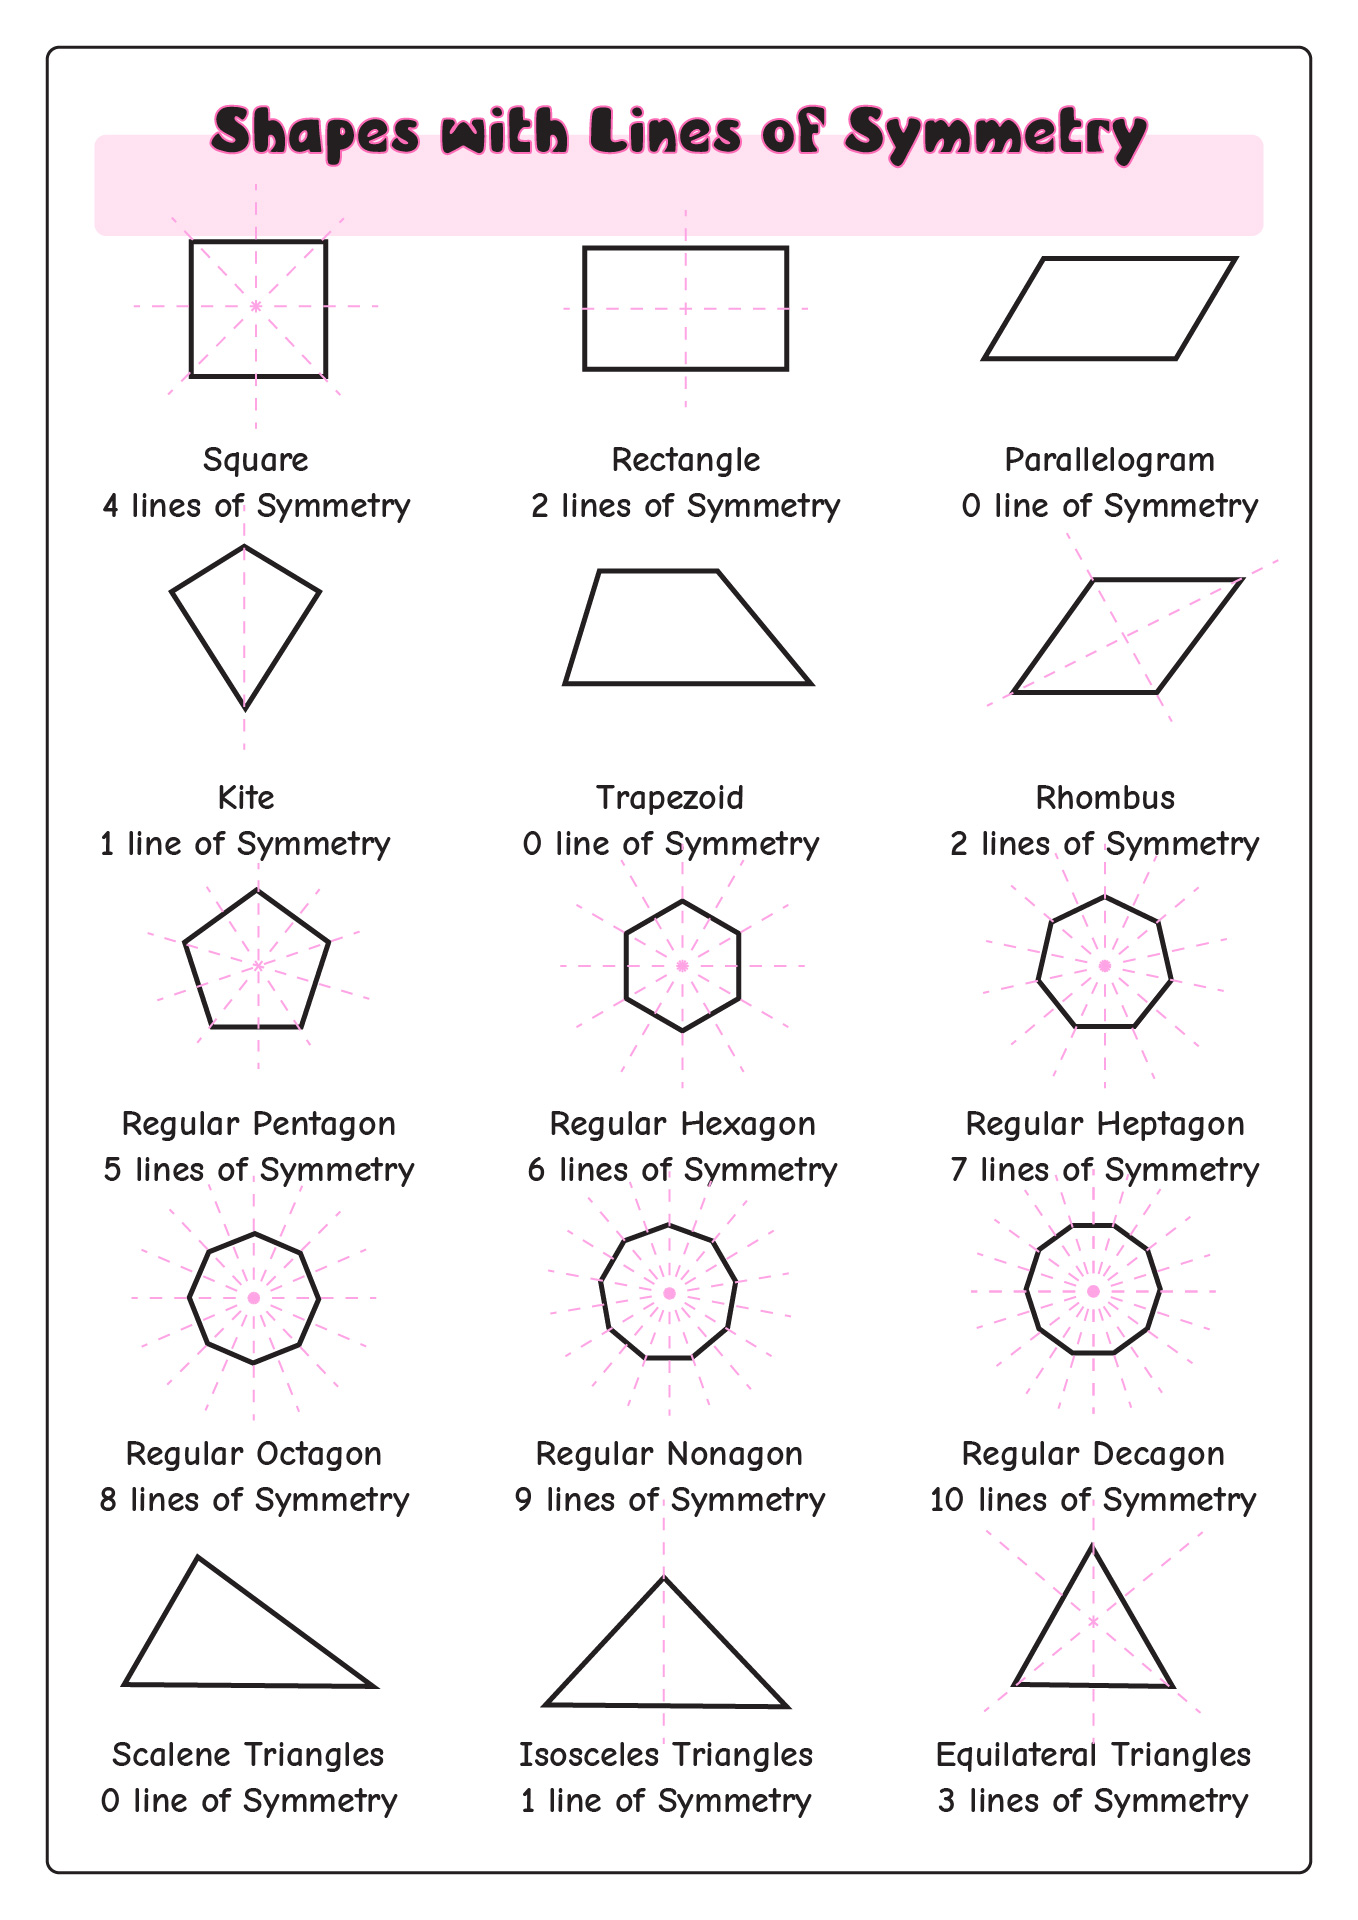 Shapes with Lines of Symmetry